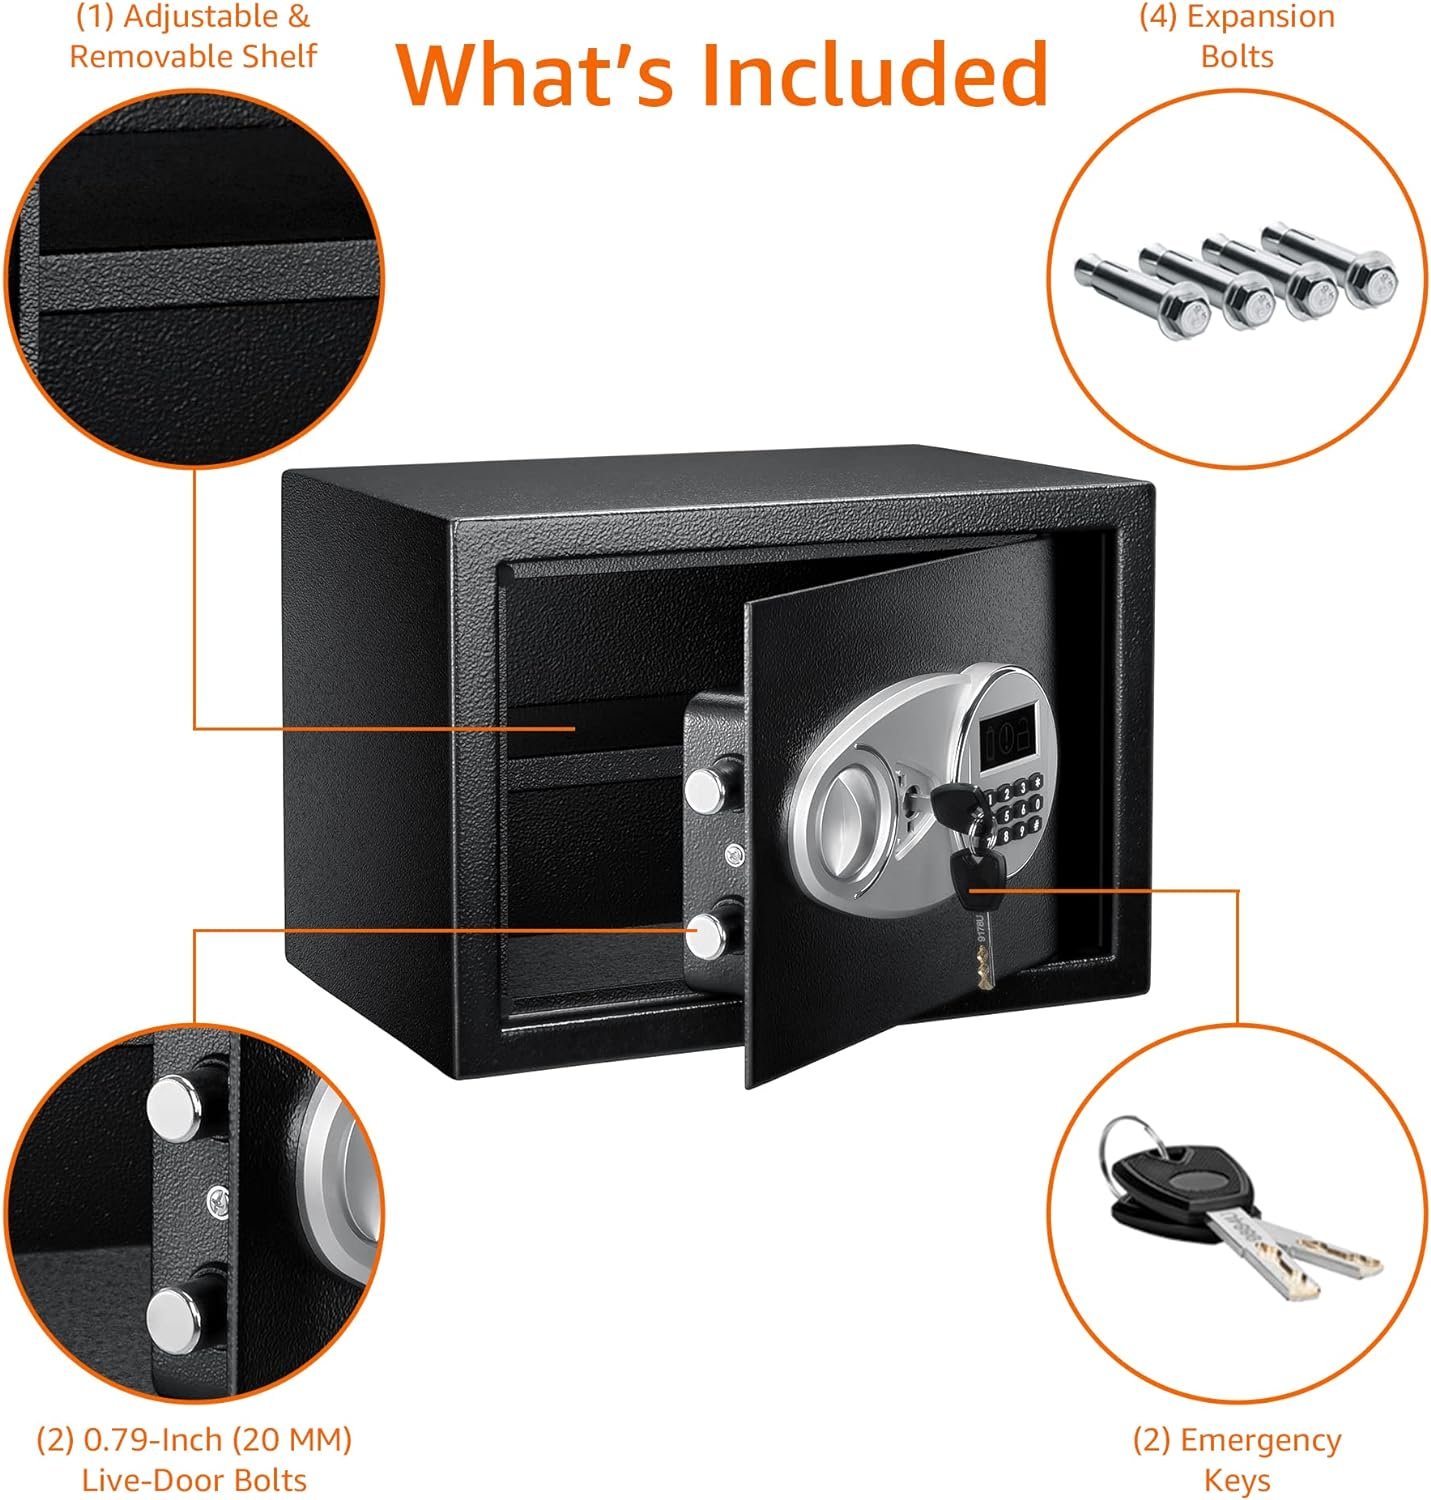 Amazon Basics Steel Security Safe and Lock Box Review